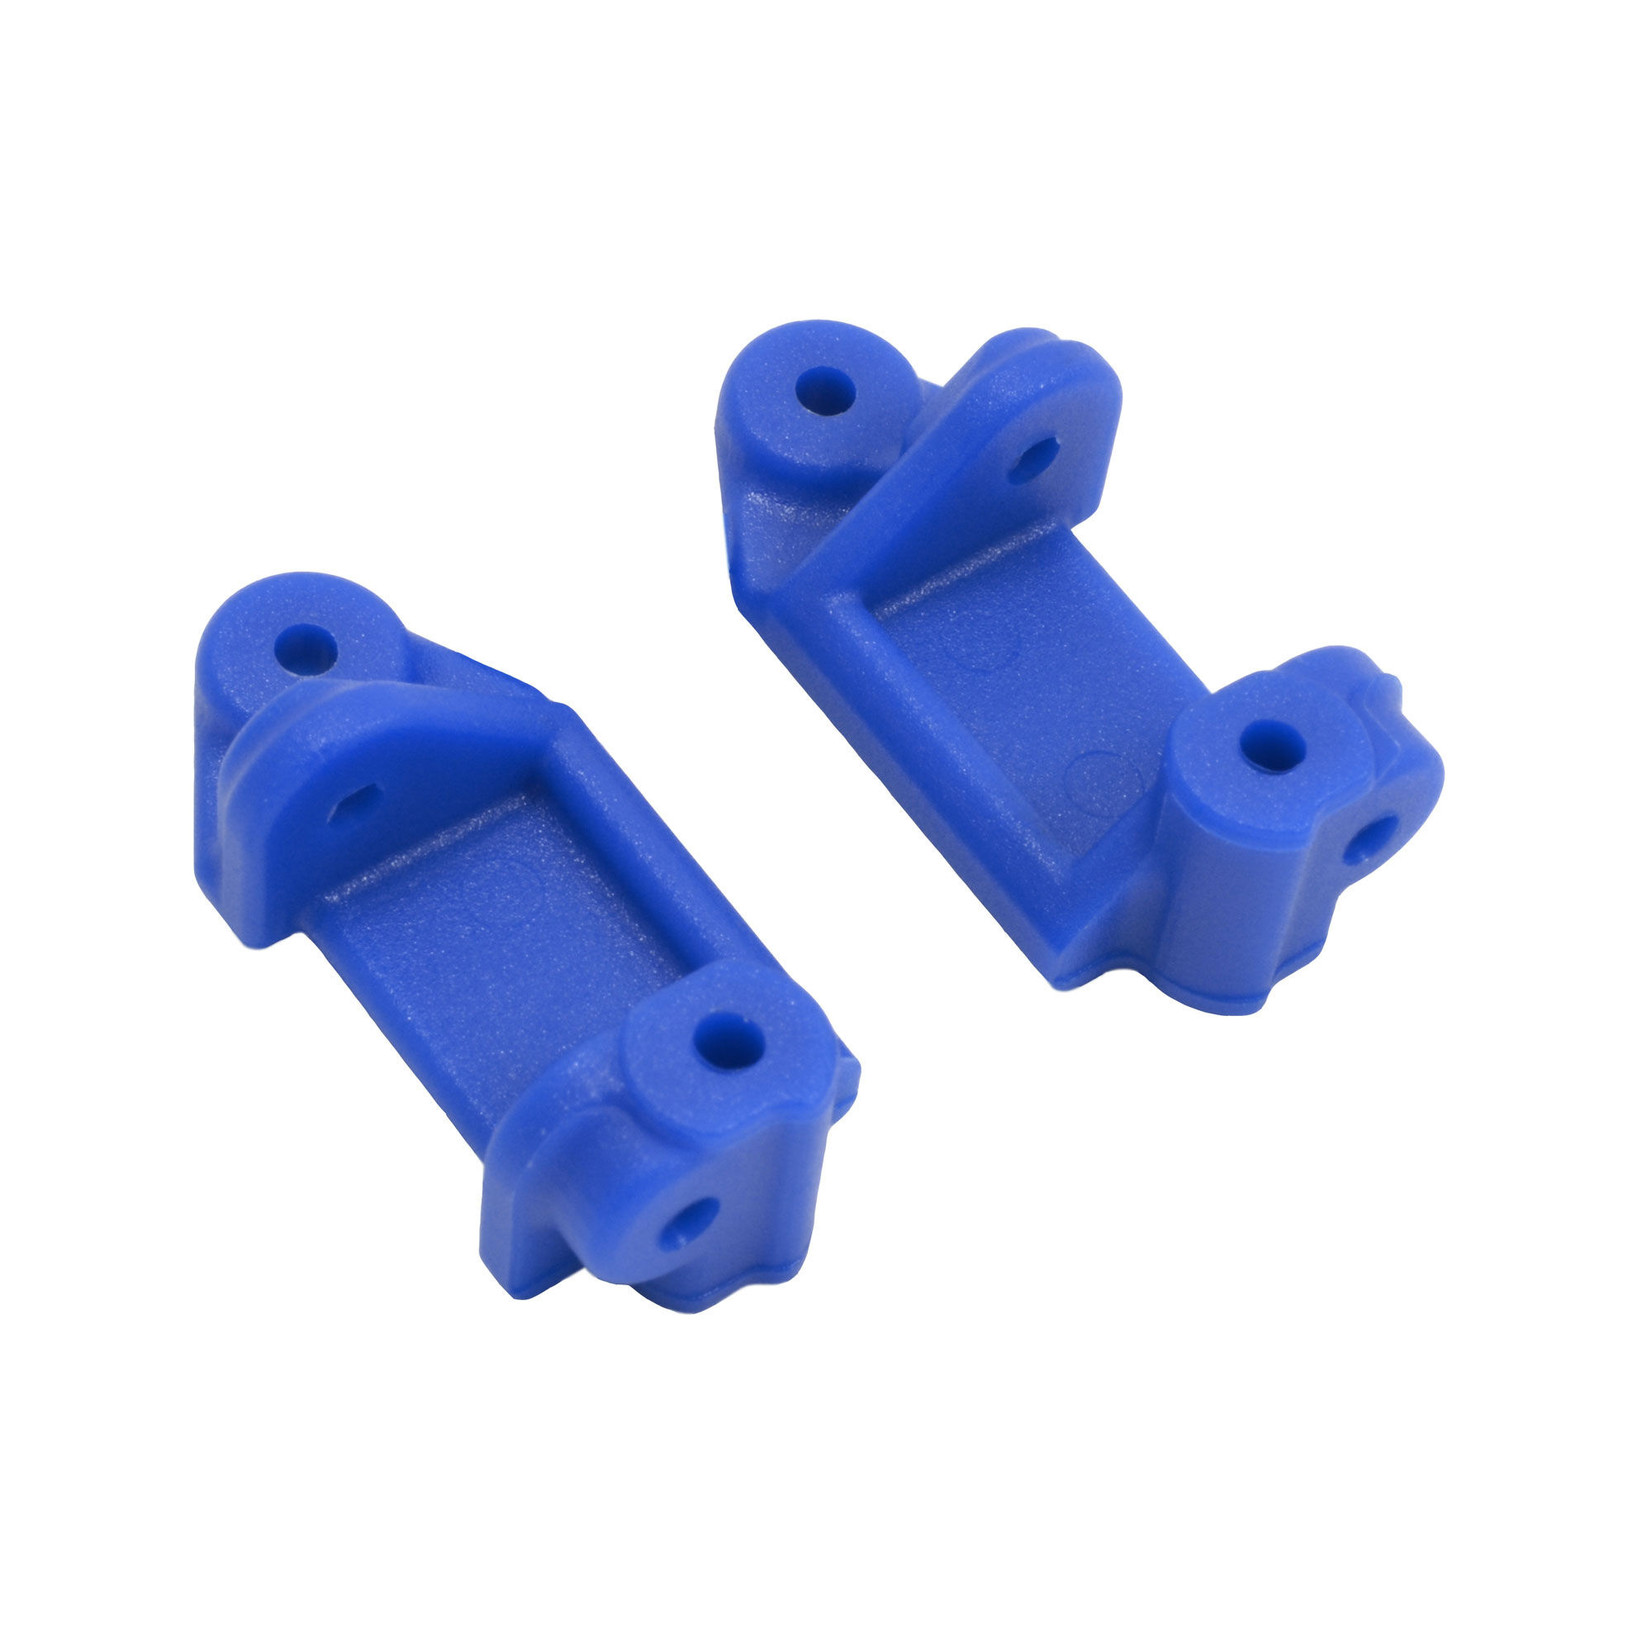 RPM Front Caster Block, Blue: TRA 2WD